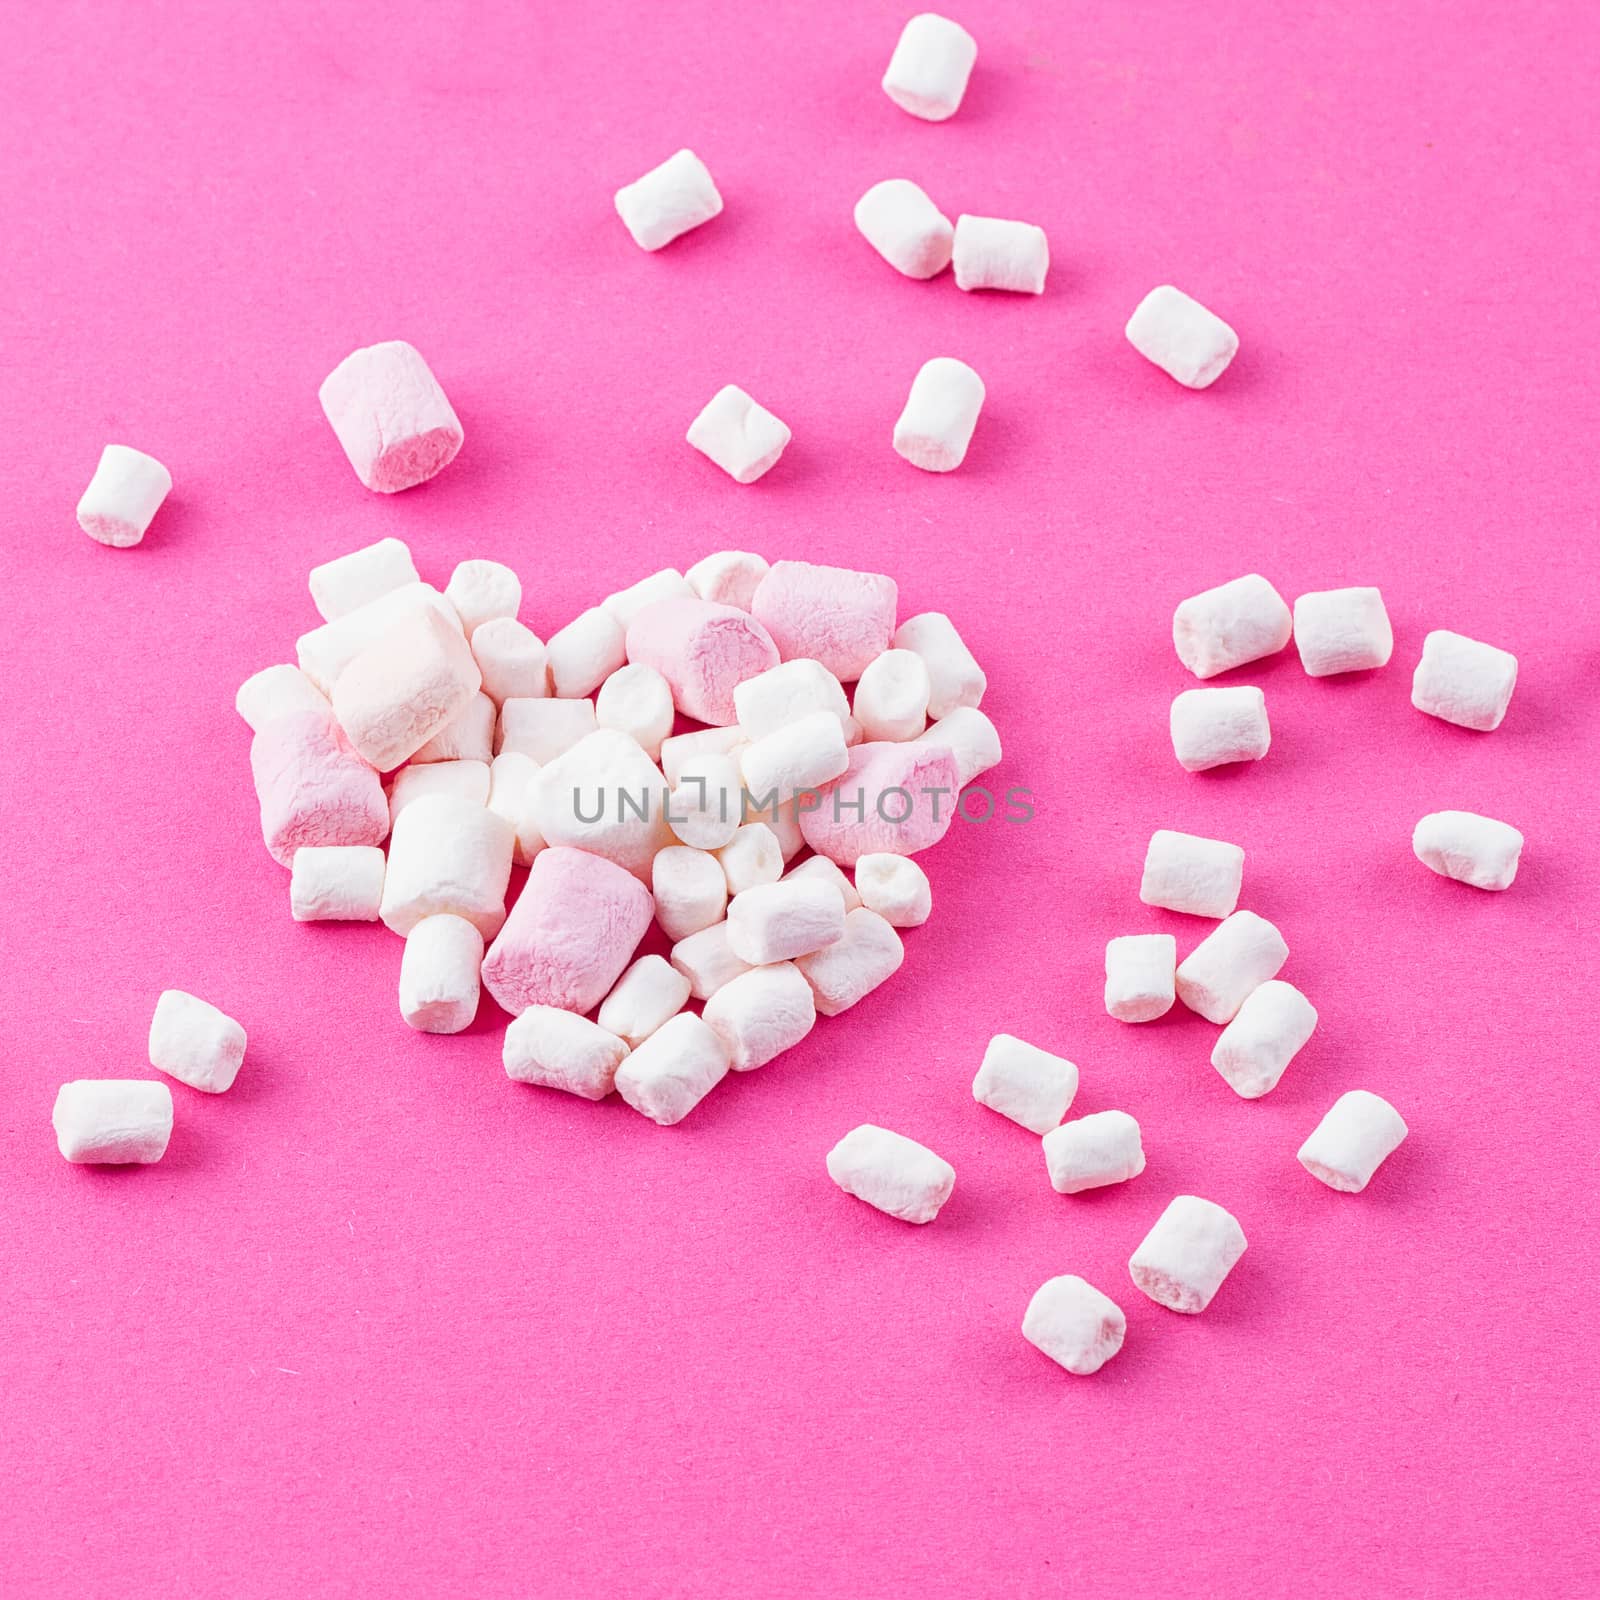 Colored twisted marshmallow on the pink background